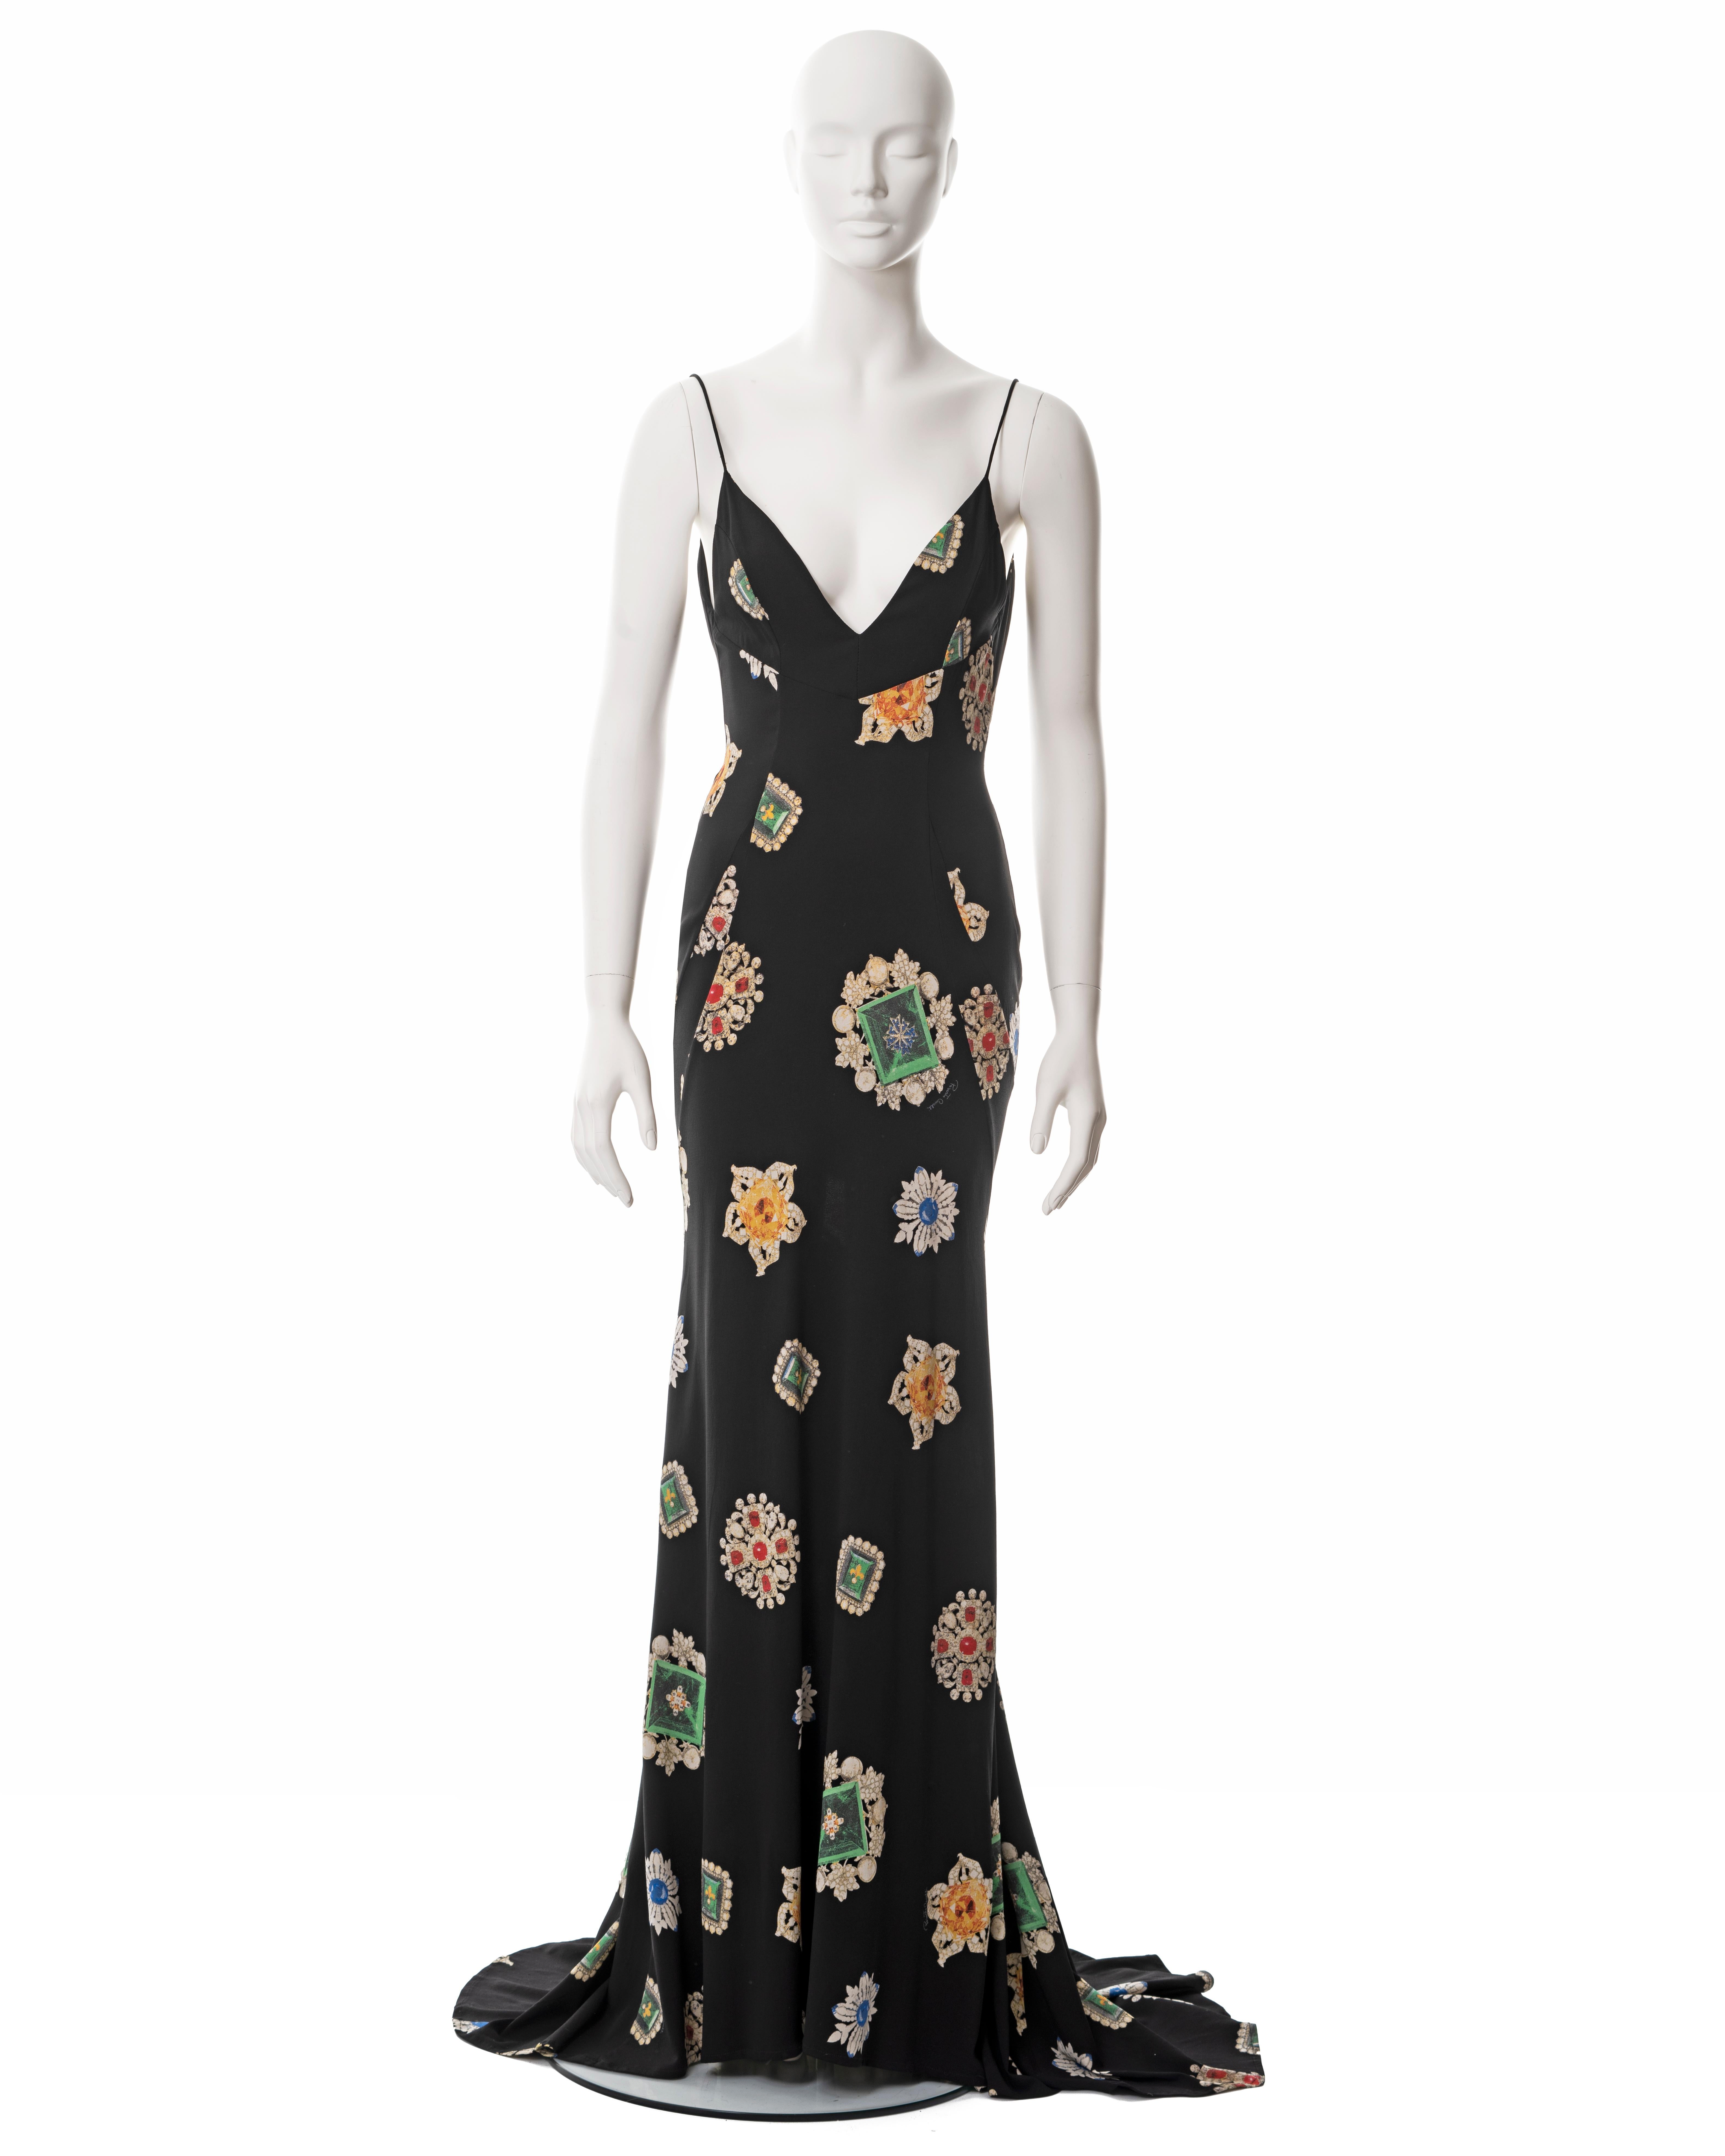 ▪ Roberto Cavalli black silk-crepe evening dress
▪ Sold by One of a Kind Archive
▪ Allover multicoloured jewel print 
▪ Plunging neckline 
▪ Floor-length skirt with train and dancing loop 
▪ Size Medium
▪ Made in Italy

All photographs in this